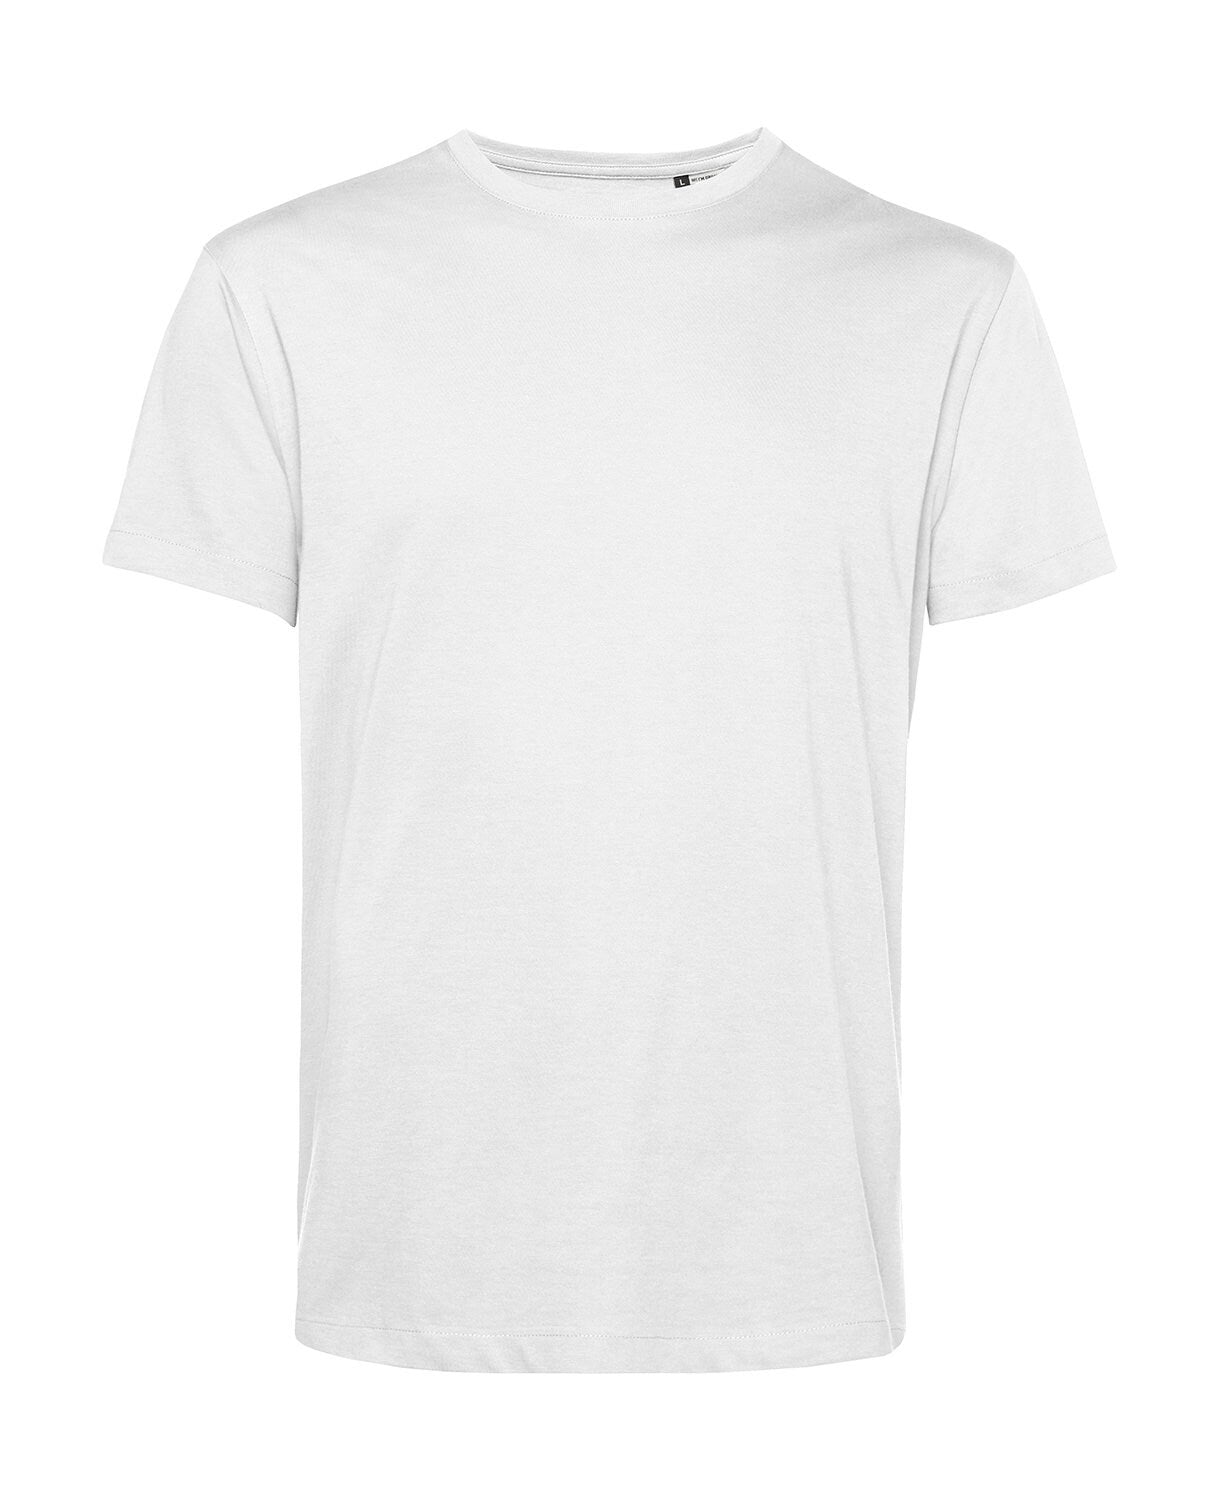 Laake Men's Organic T-Shirts Design Themselves and Have Them Printed Online Personalized on Both Sides (White)